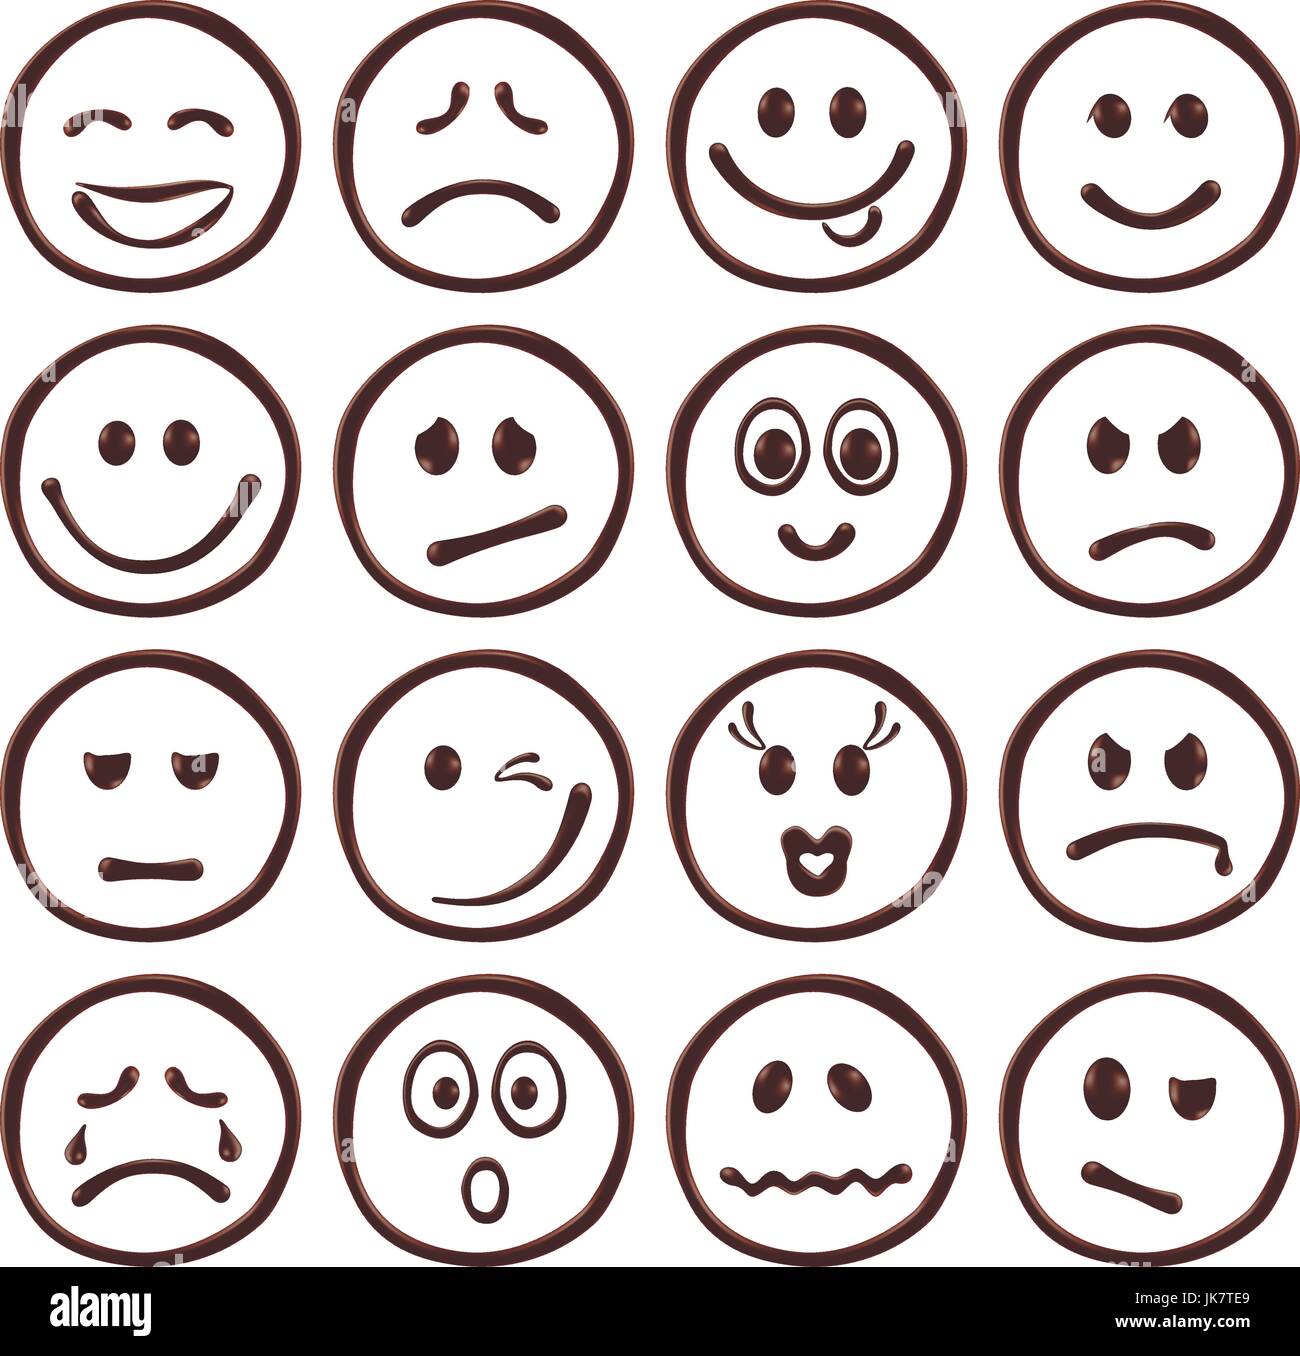 Set of chocolate smiley faces on white background, realistic vector illustration Stock Vector